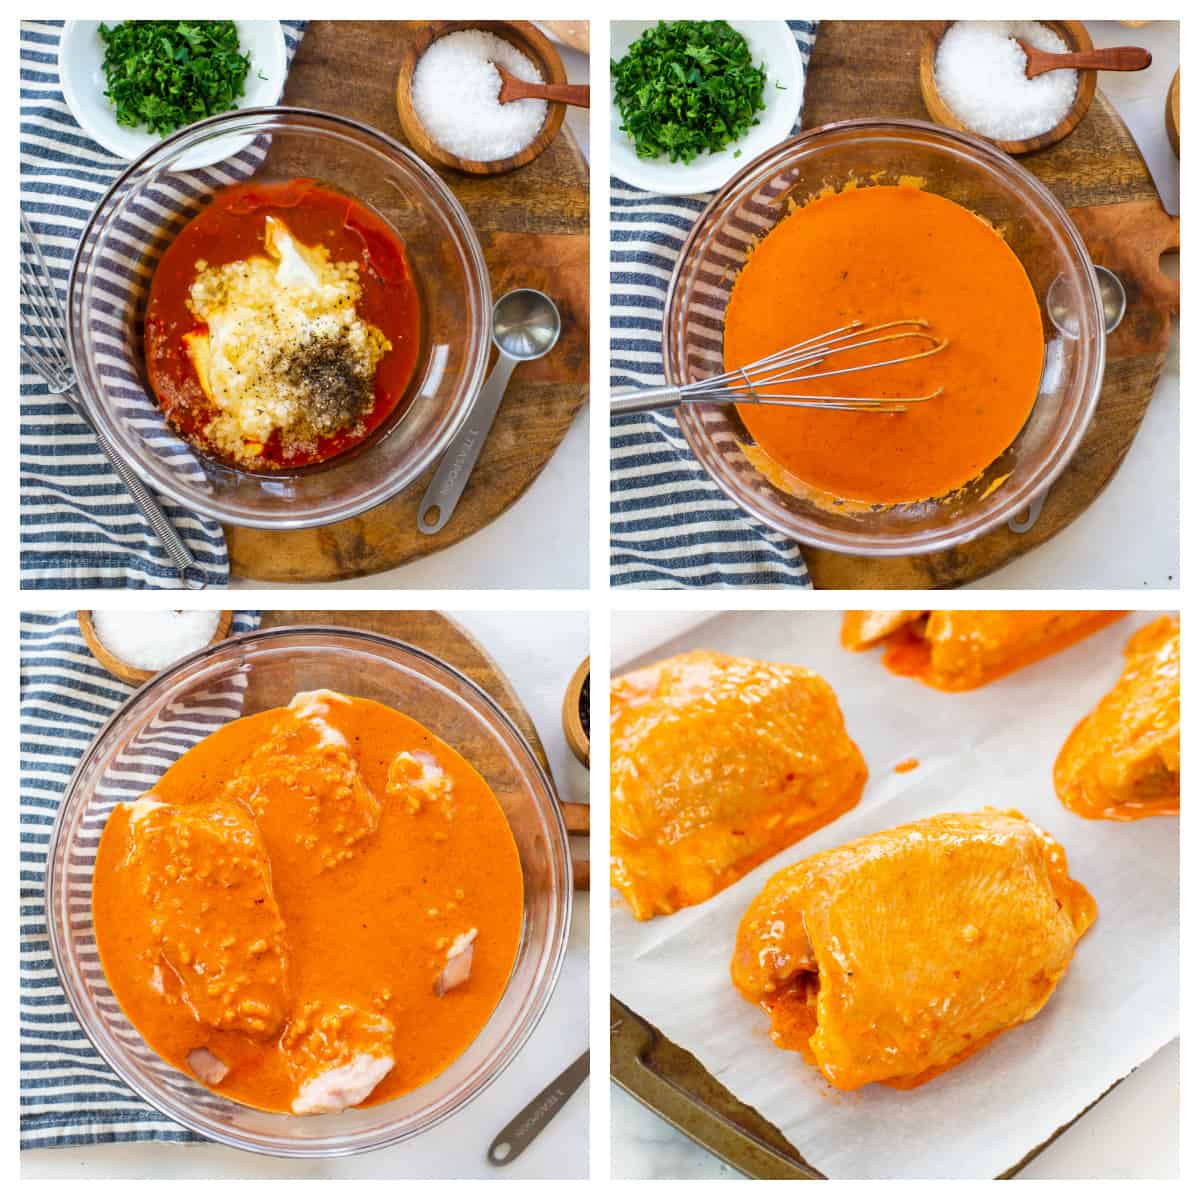 Collage showing how to make harissa paste marinade for chicken.